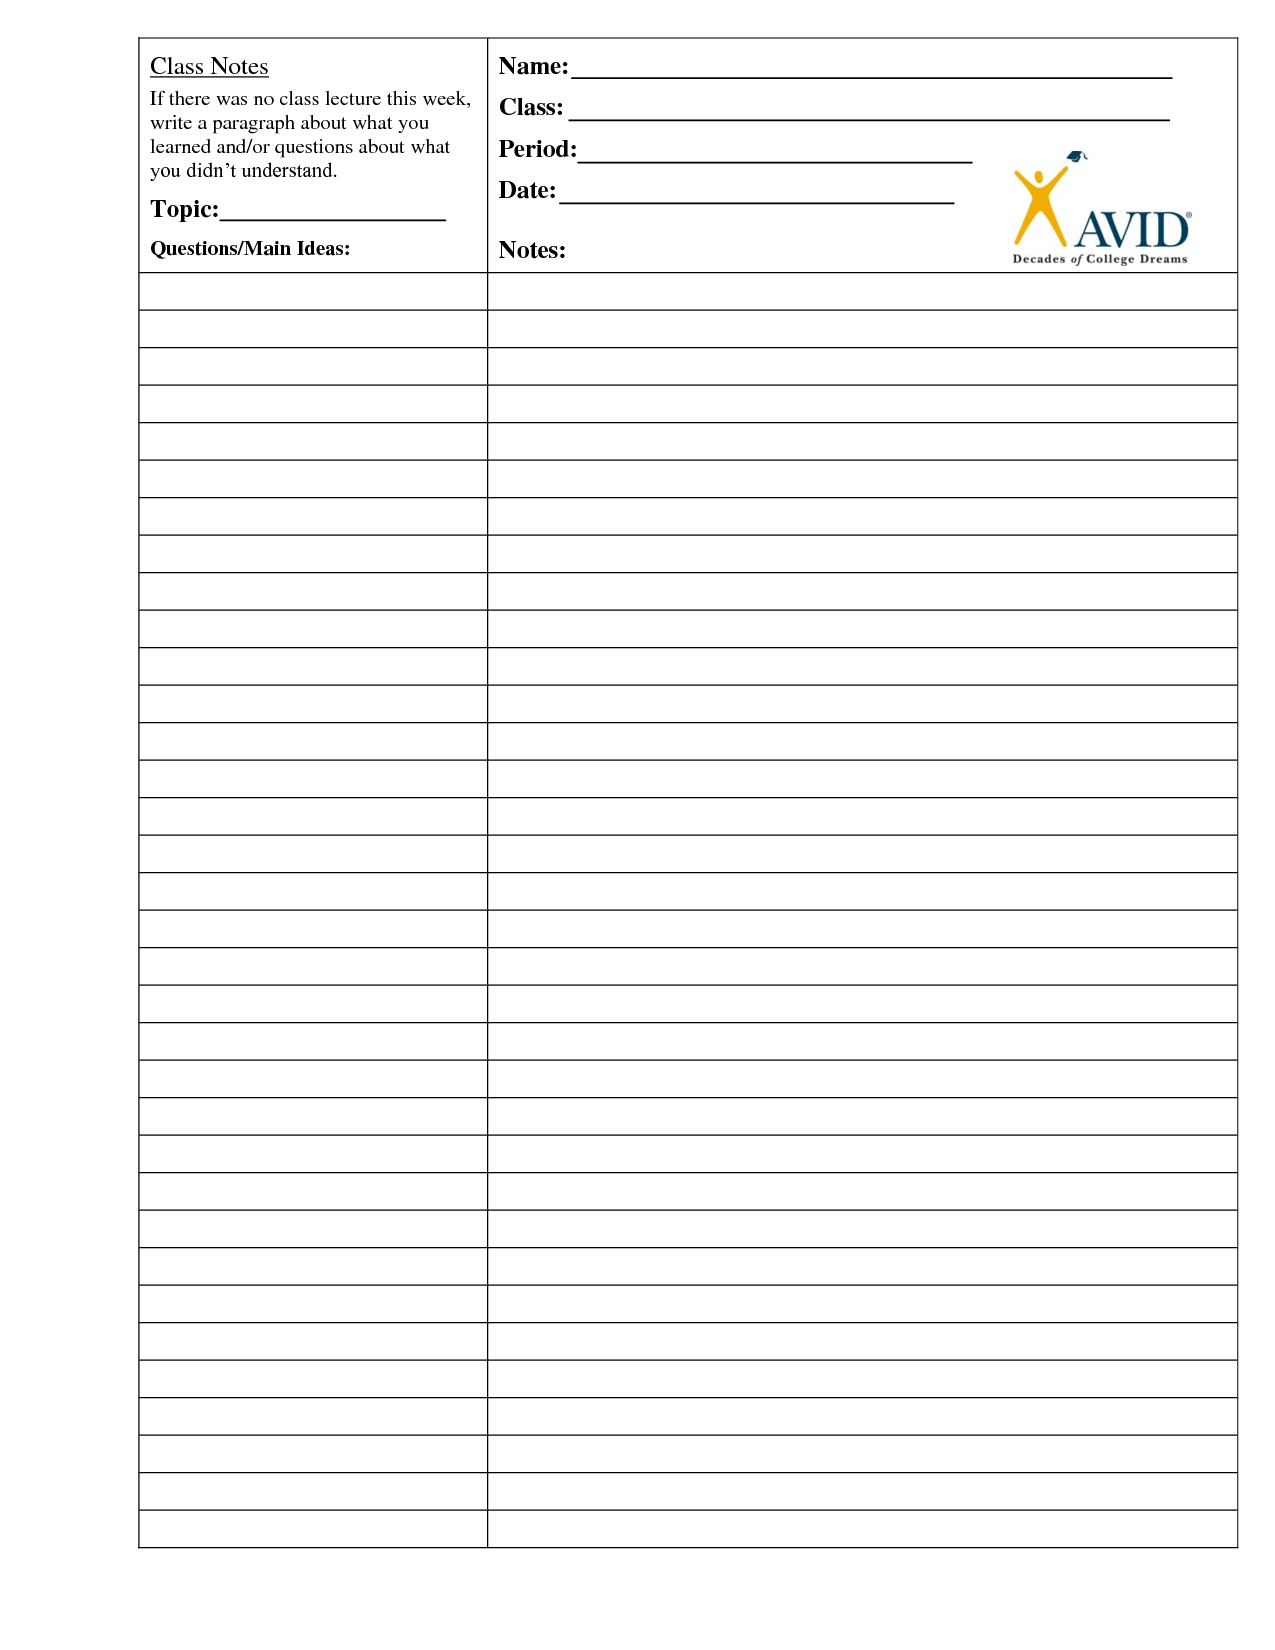 Avid Cornell Notes Template Word | Hozzt Pertaining To Note Taking Word Template